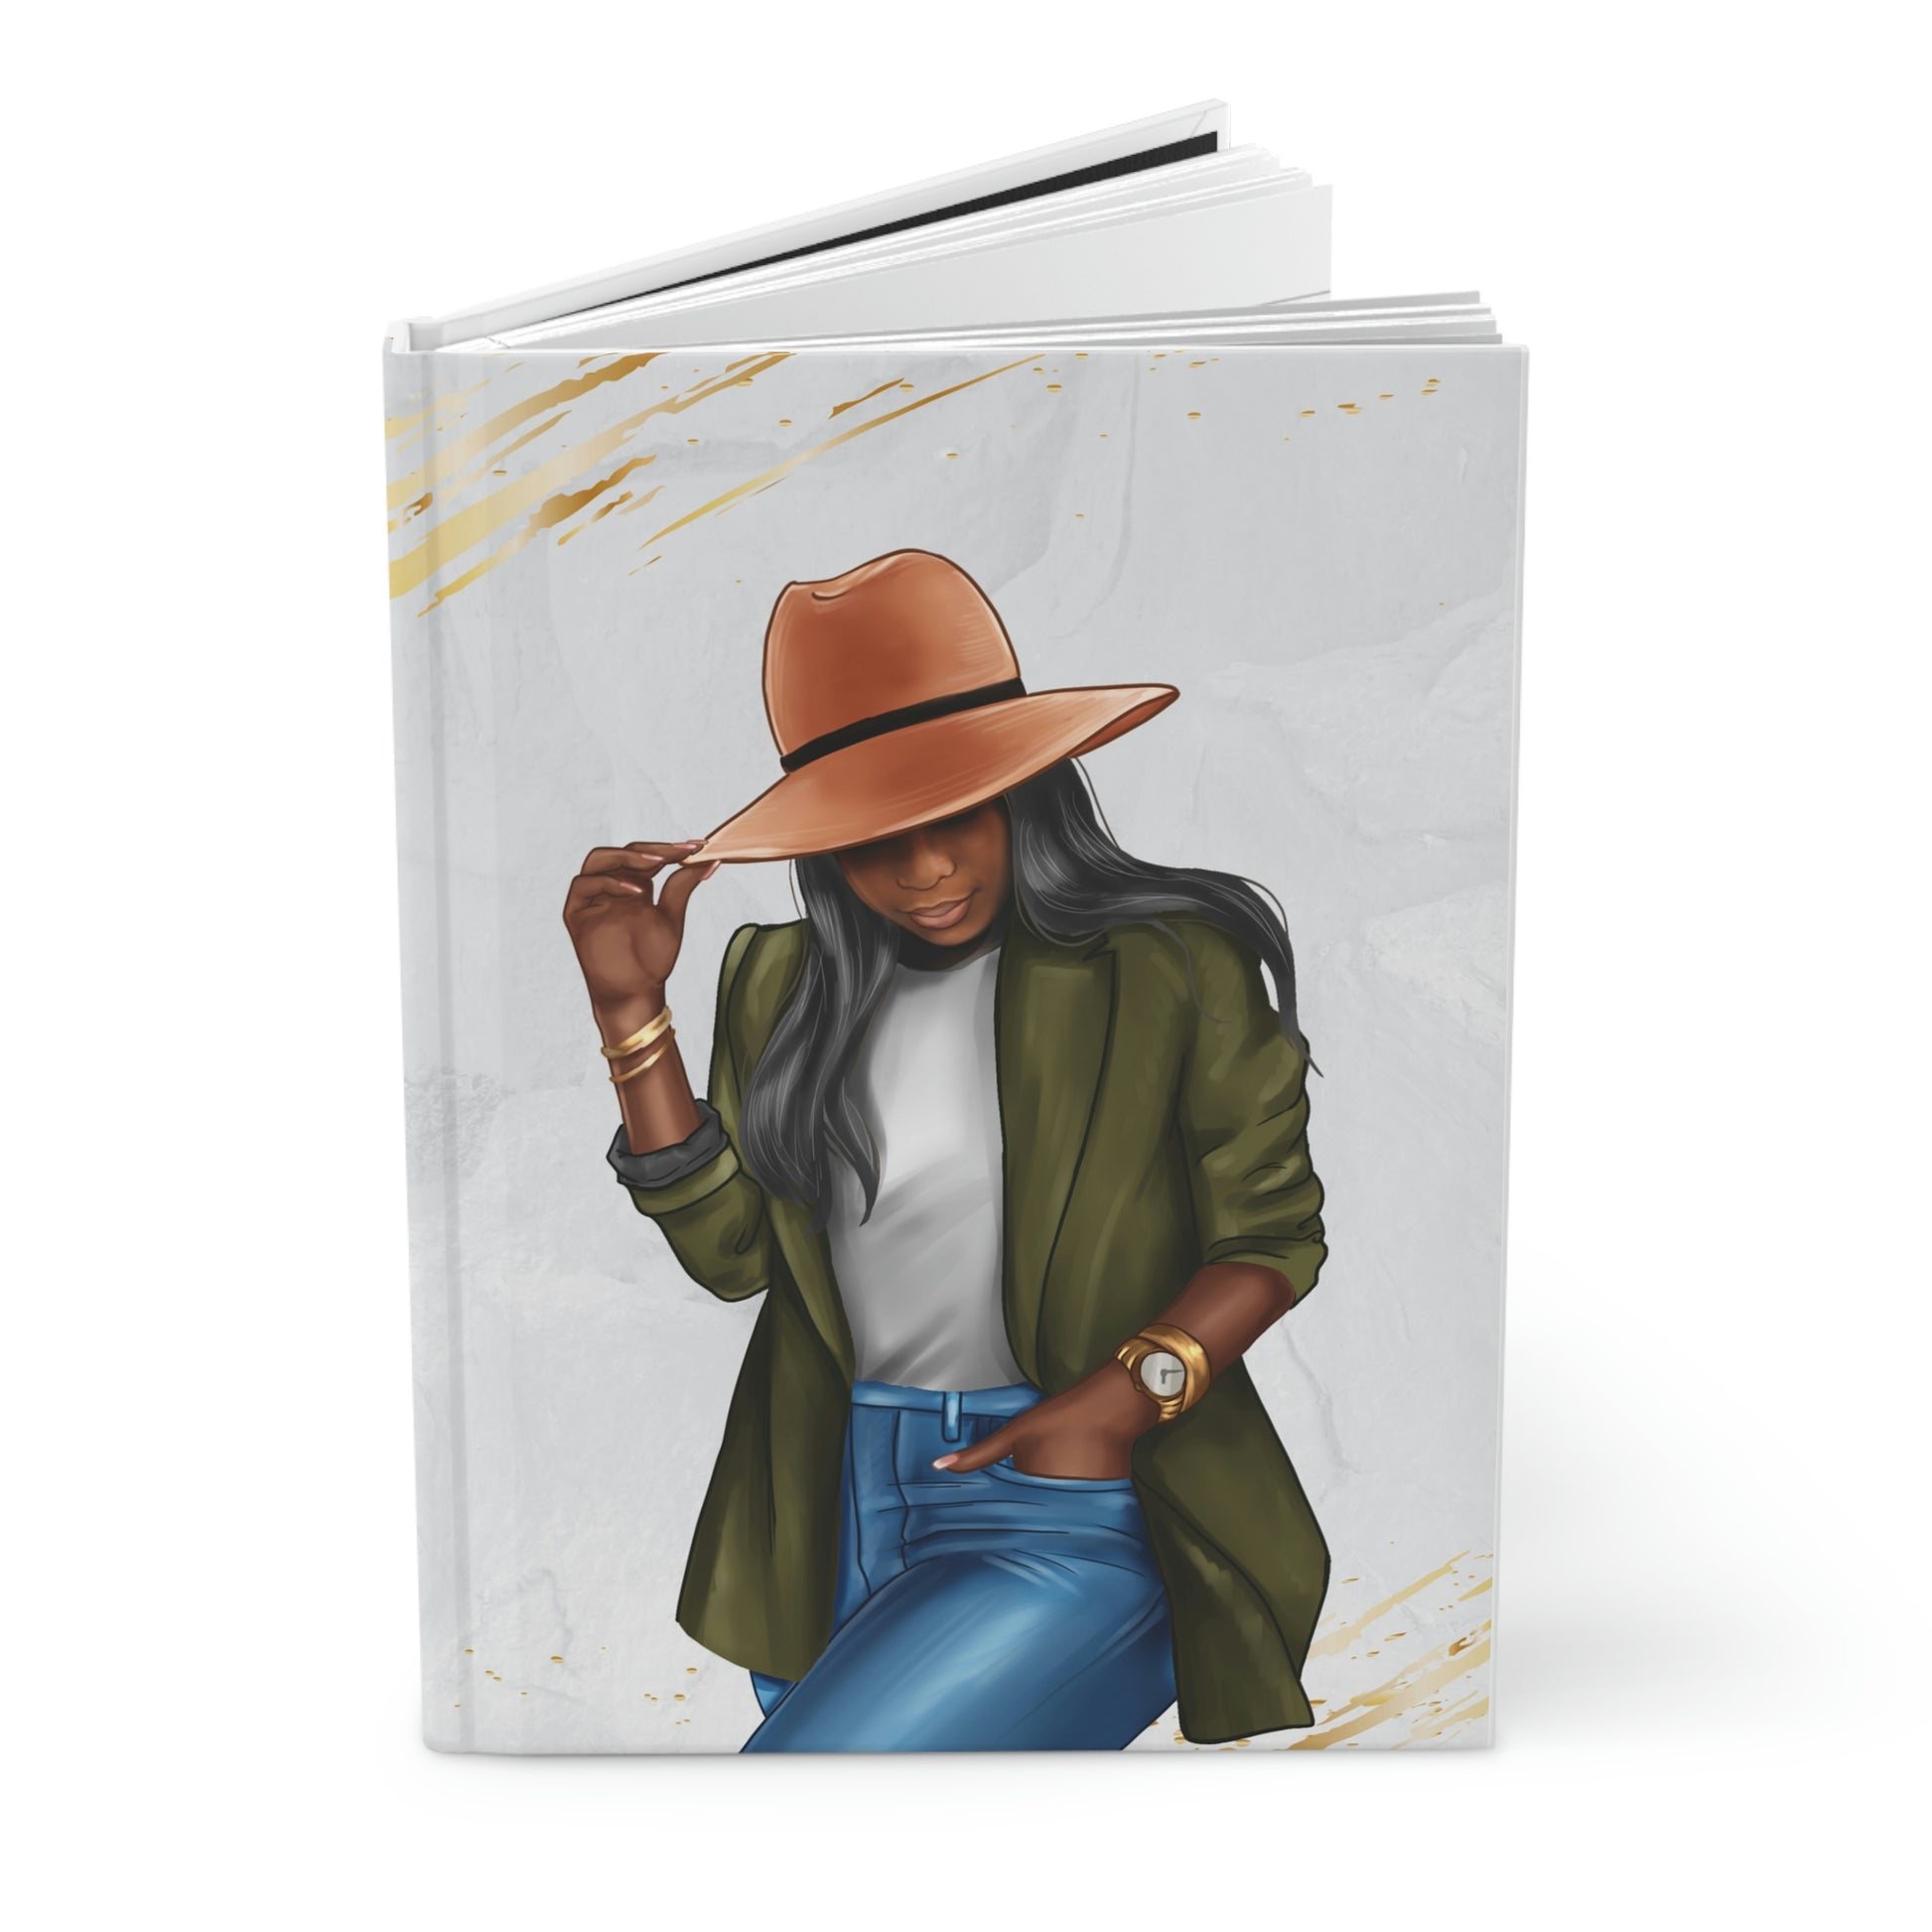 Black Girl in Denim Hardcover Matte Journal | Lined Pages for daily writing - Eb Creations Paper products Black Girl in Denim Hardcover Matte Journal | Lined Pages for daily writing